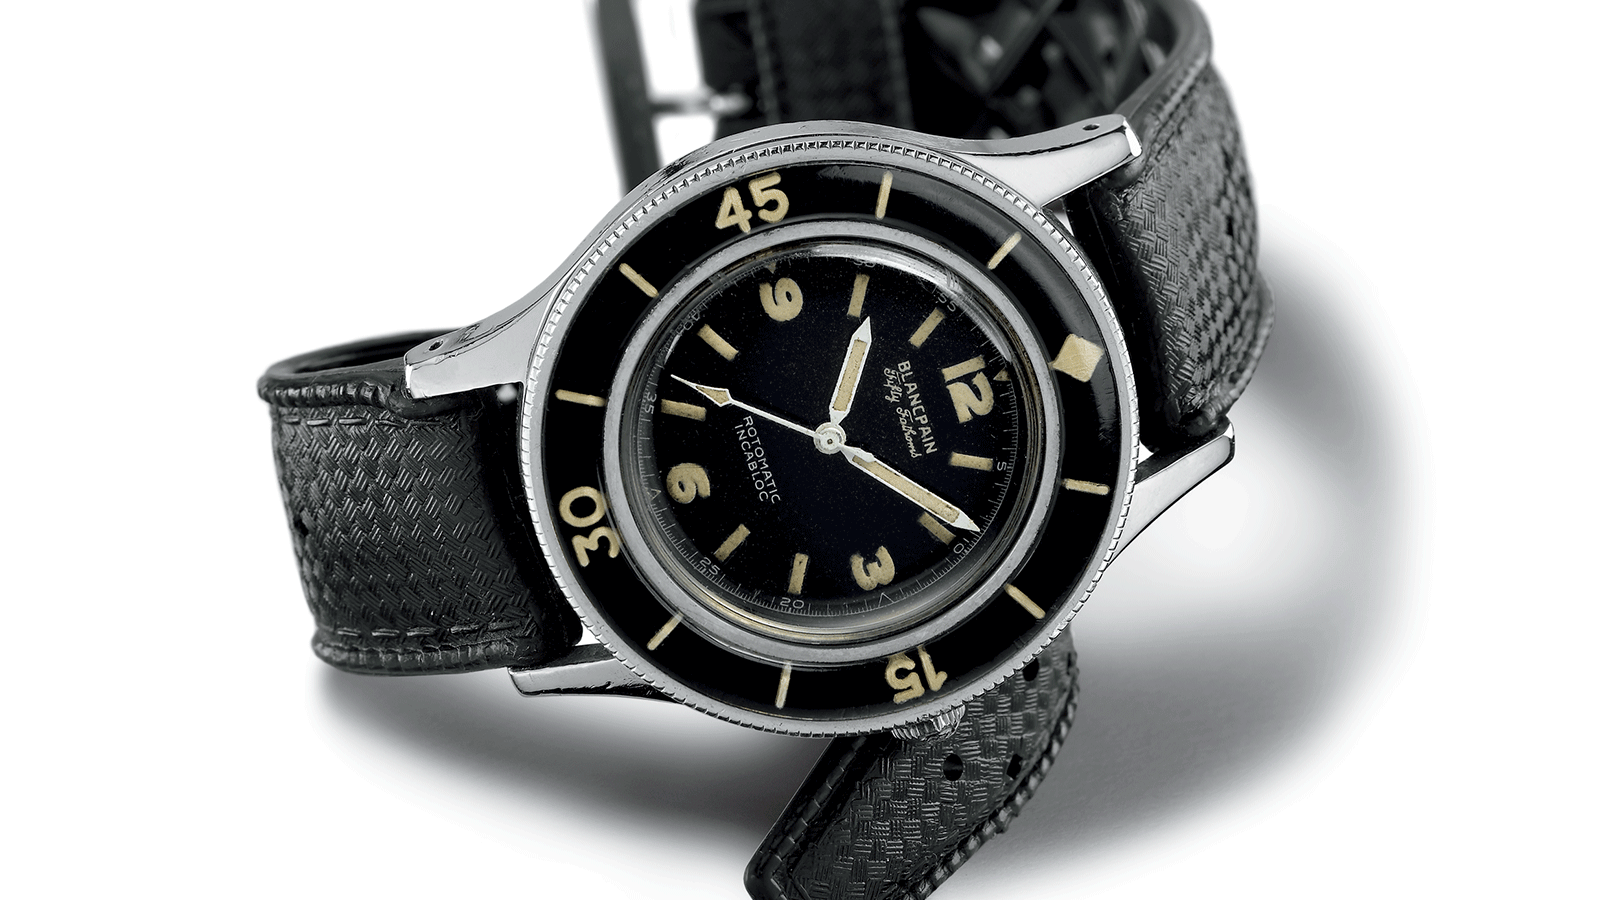 Blancpain First Fifty Fathoms 1953